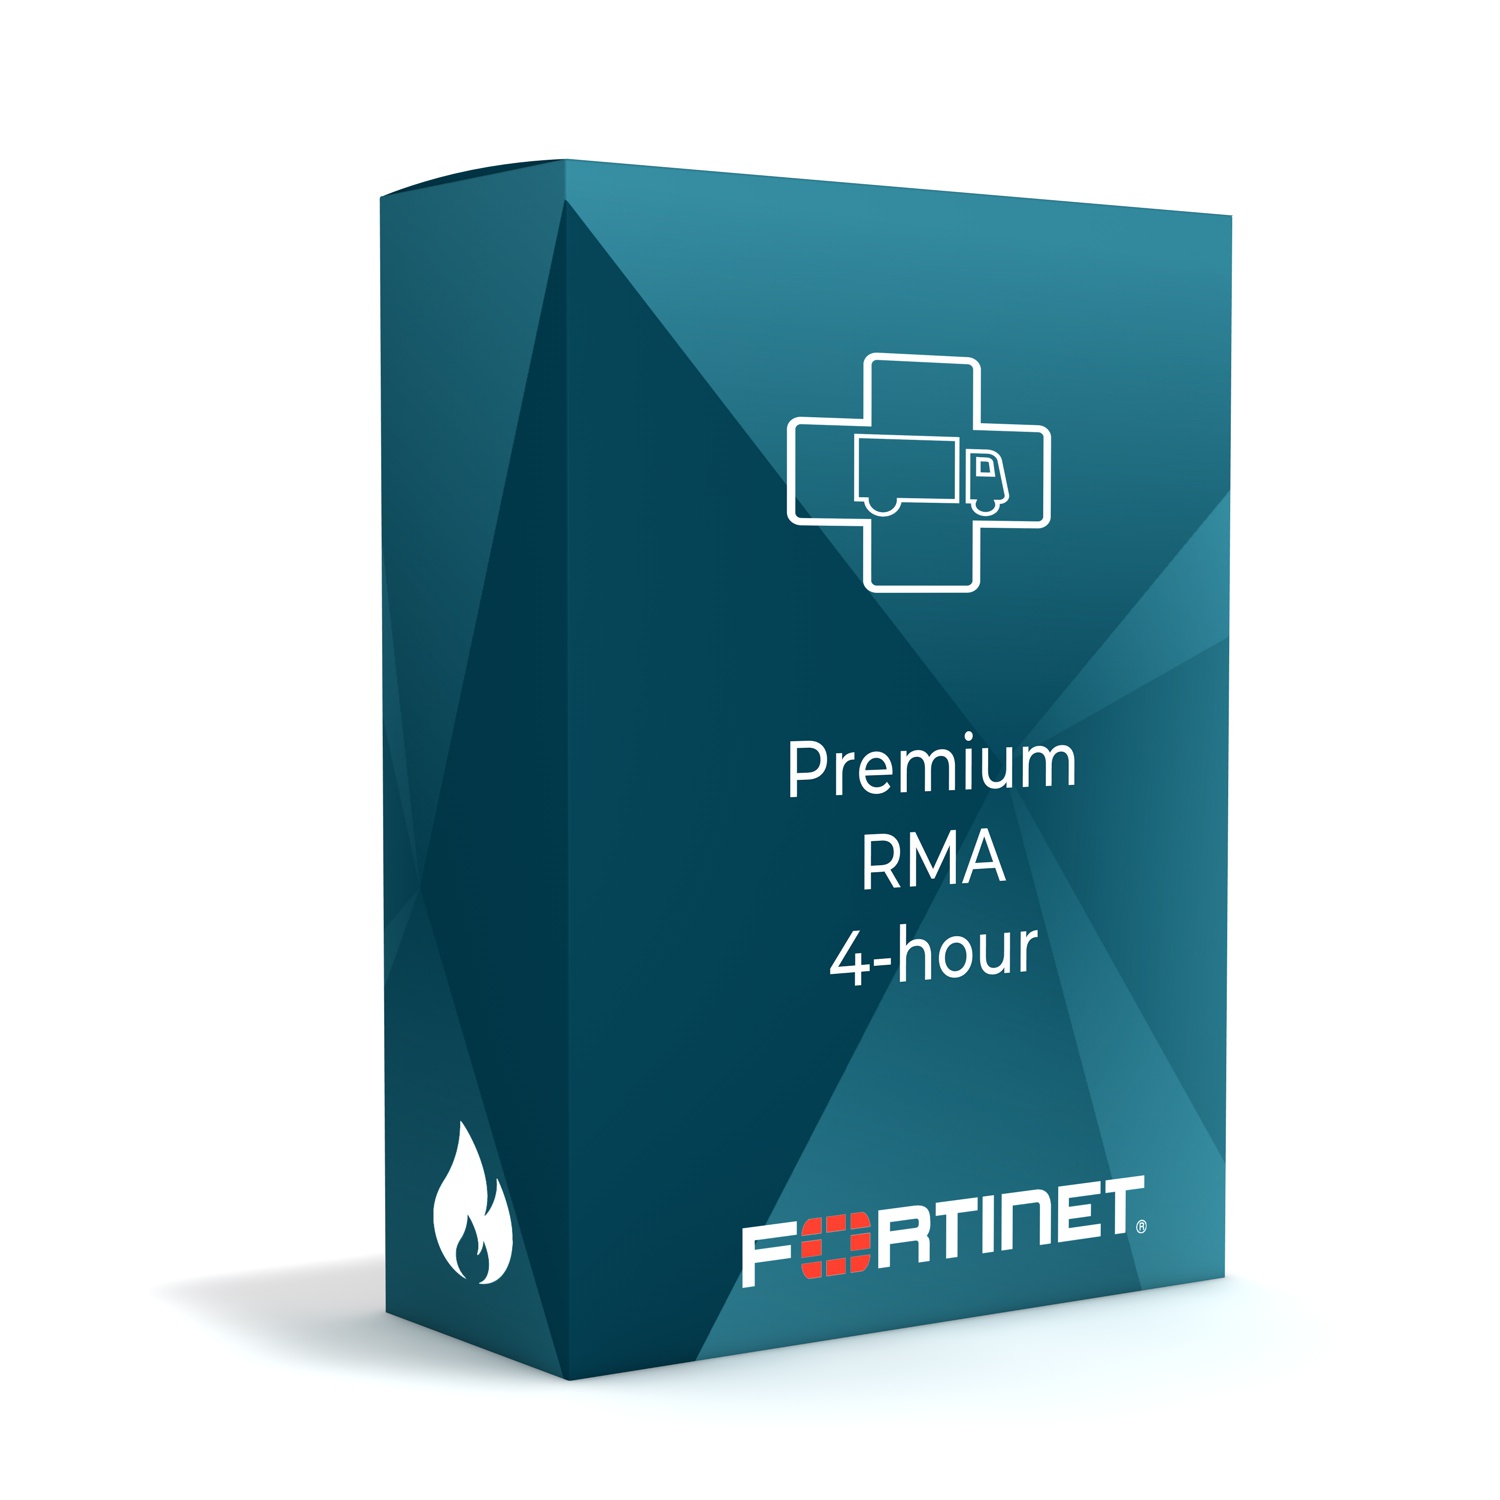 Fortinet FortiCare Premium RMA 4-hour Courier for FortiAP 23JF, 5 years  (FC-10-P23JF-211-02-60) | Buy for less with consulting and support